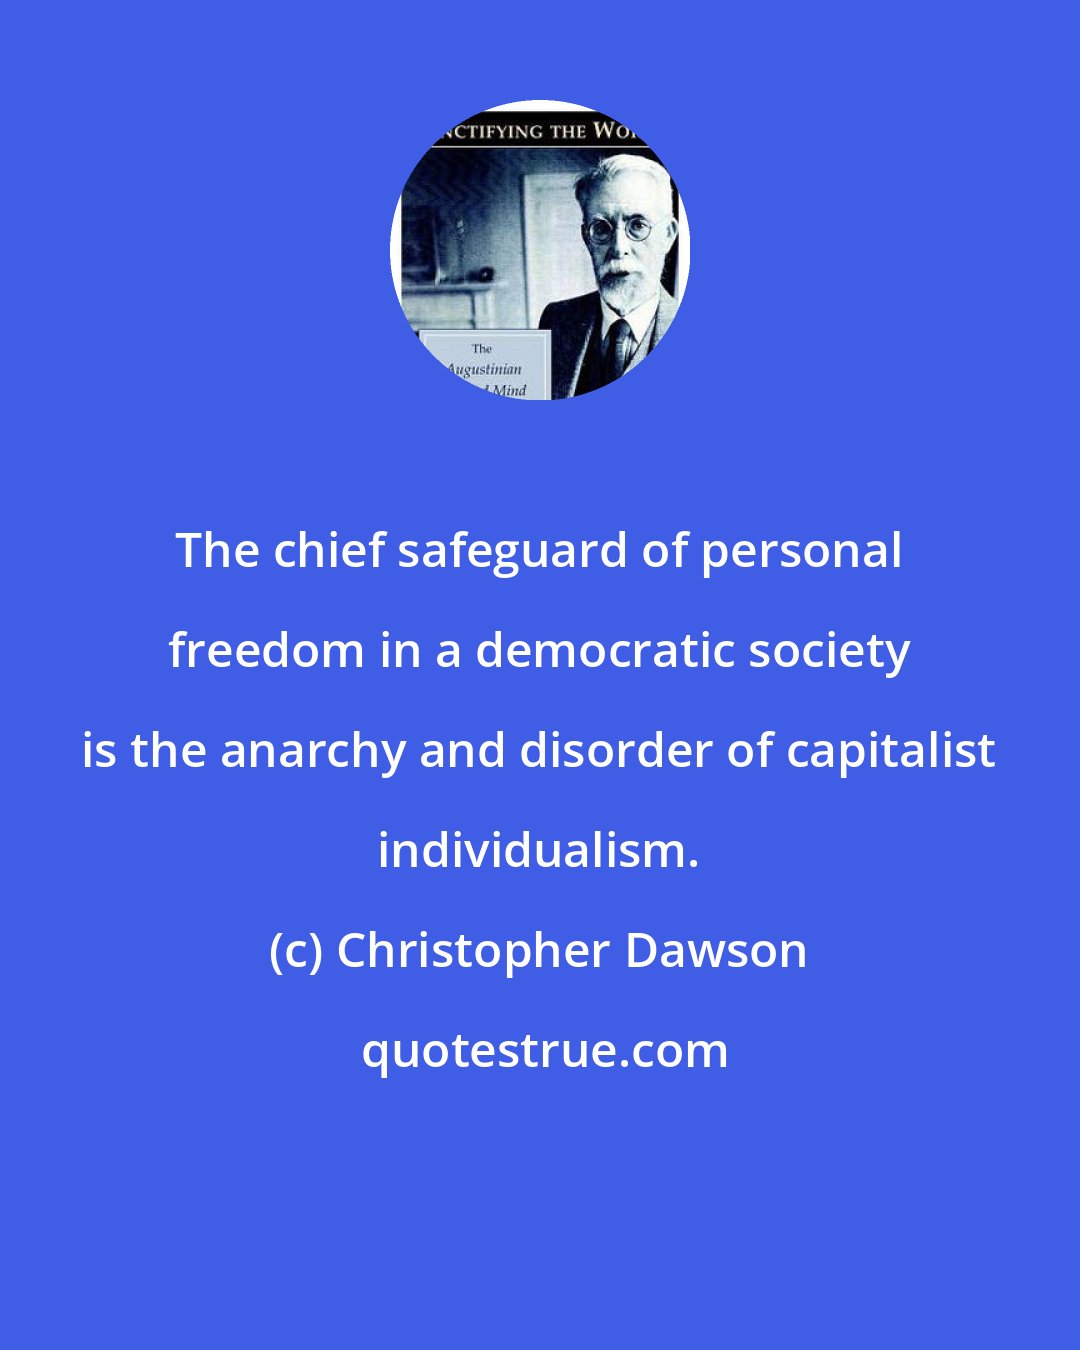 Christopher Dawson: The chief safeguard of personal freedom in a democratic society is the anarchy and disorder of capitalist individualism.